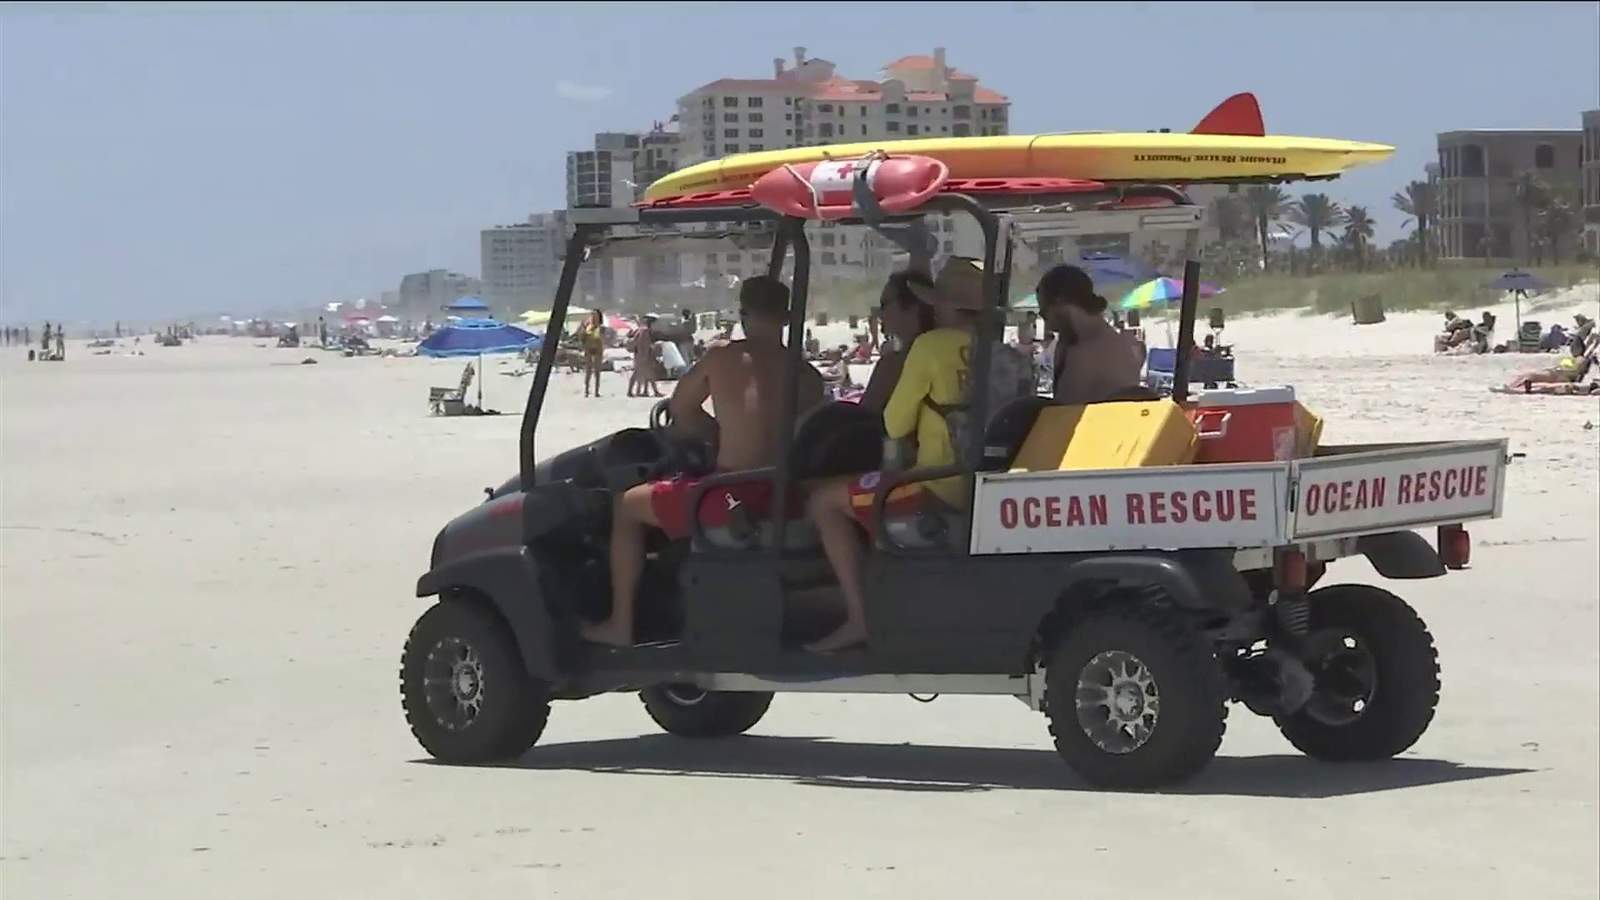 Extra lifeguards on duty as beaches prepare for Memorial Day weekend